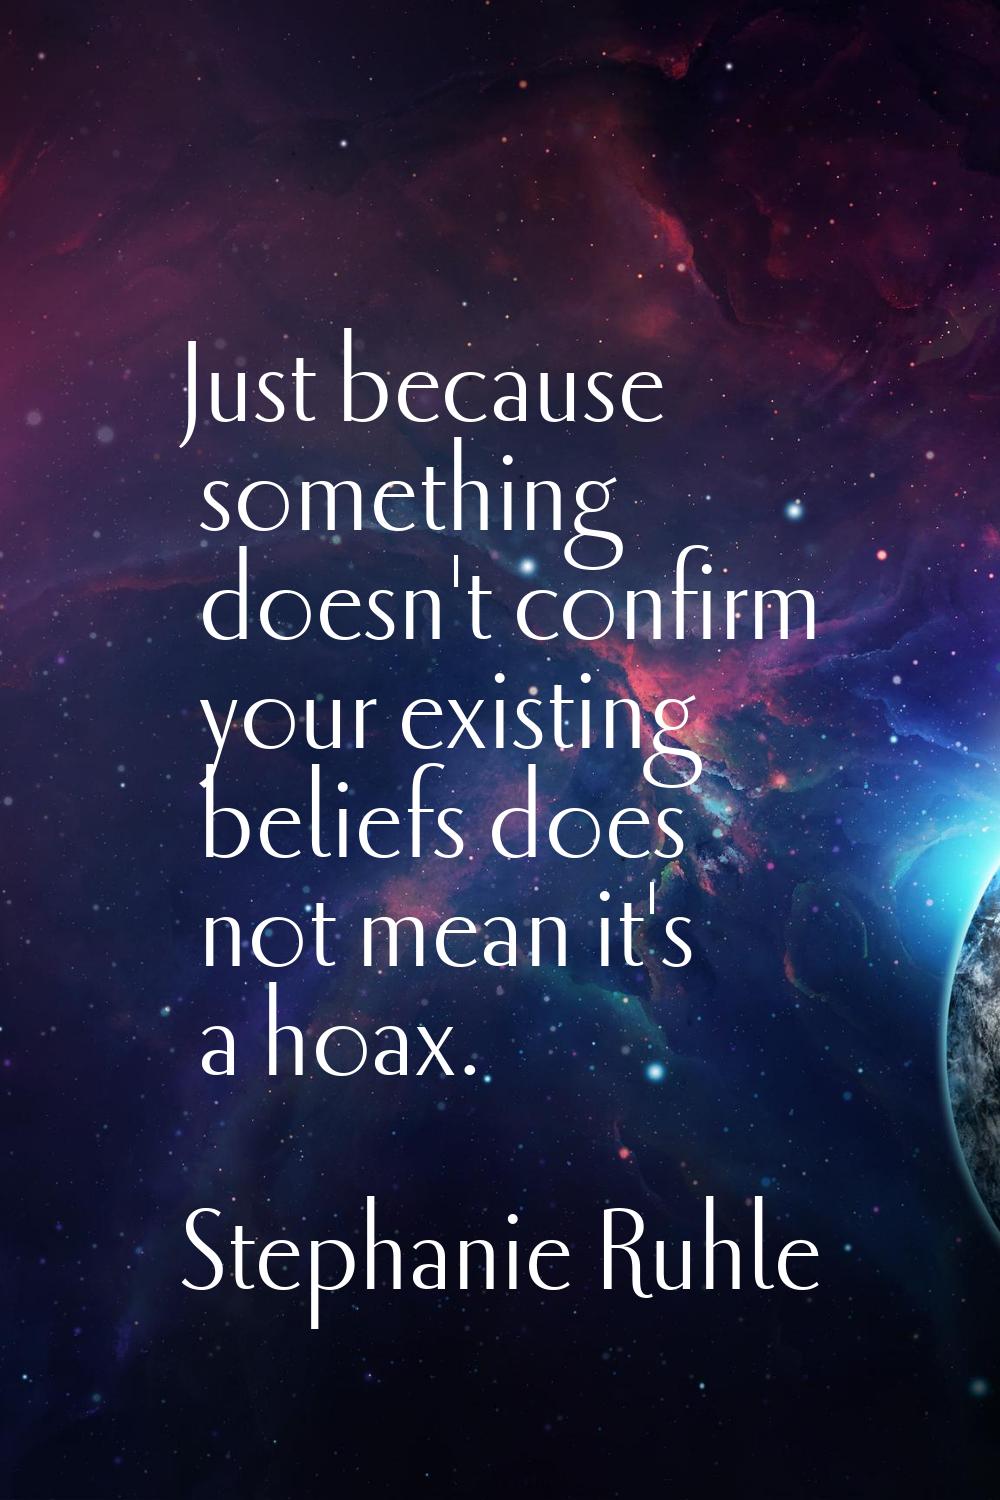 Just because something doesn't confirm your existing beliefs does not mean it's a hoax.